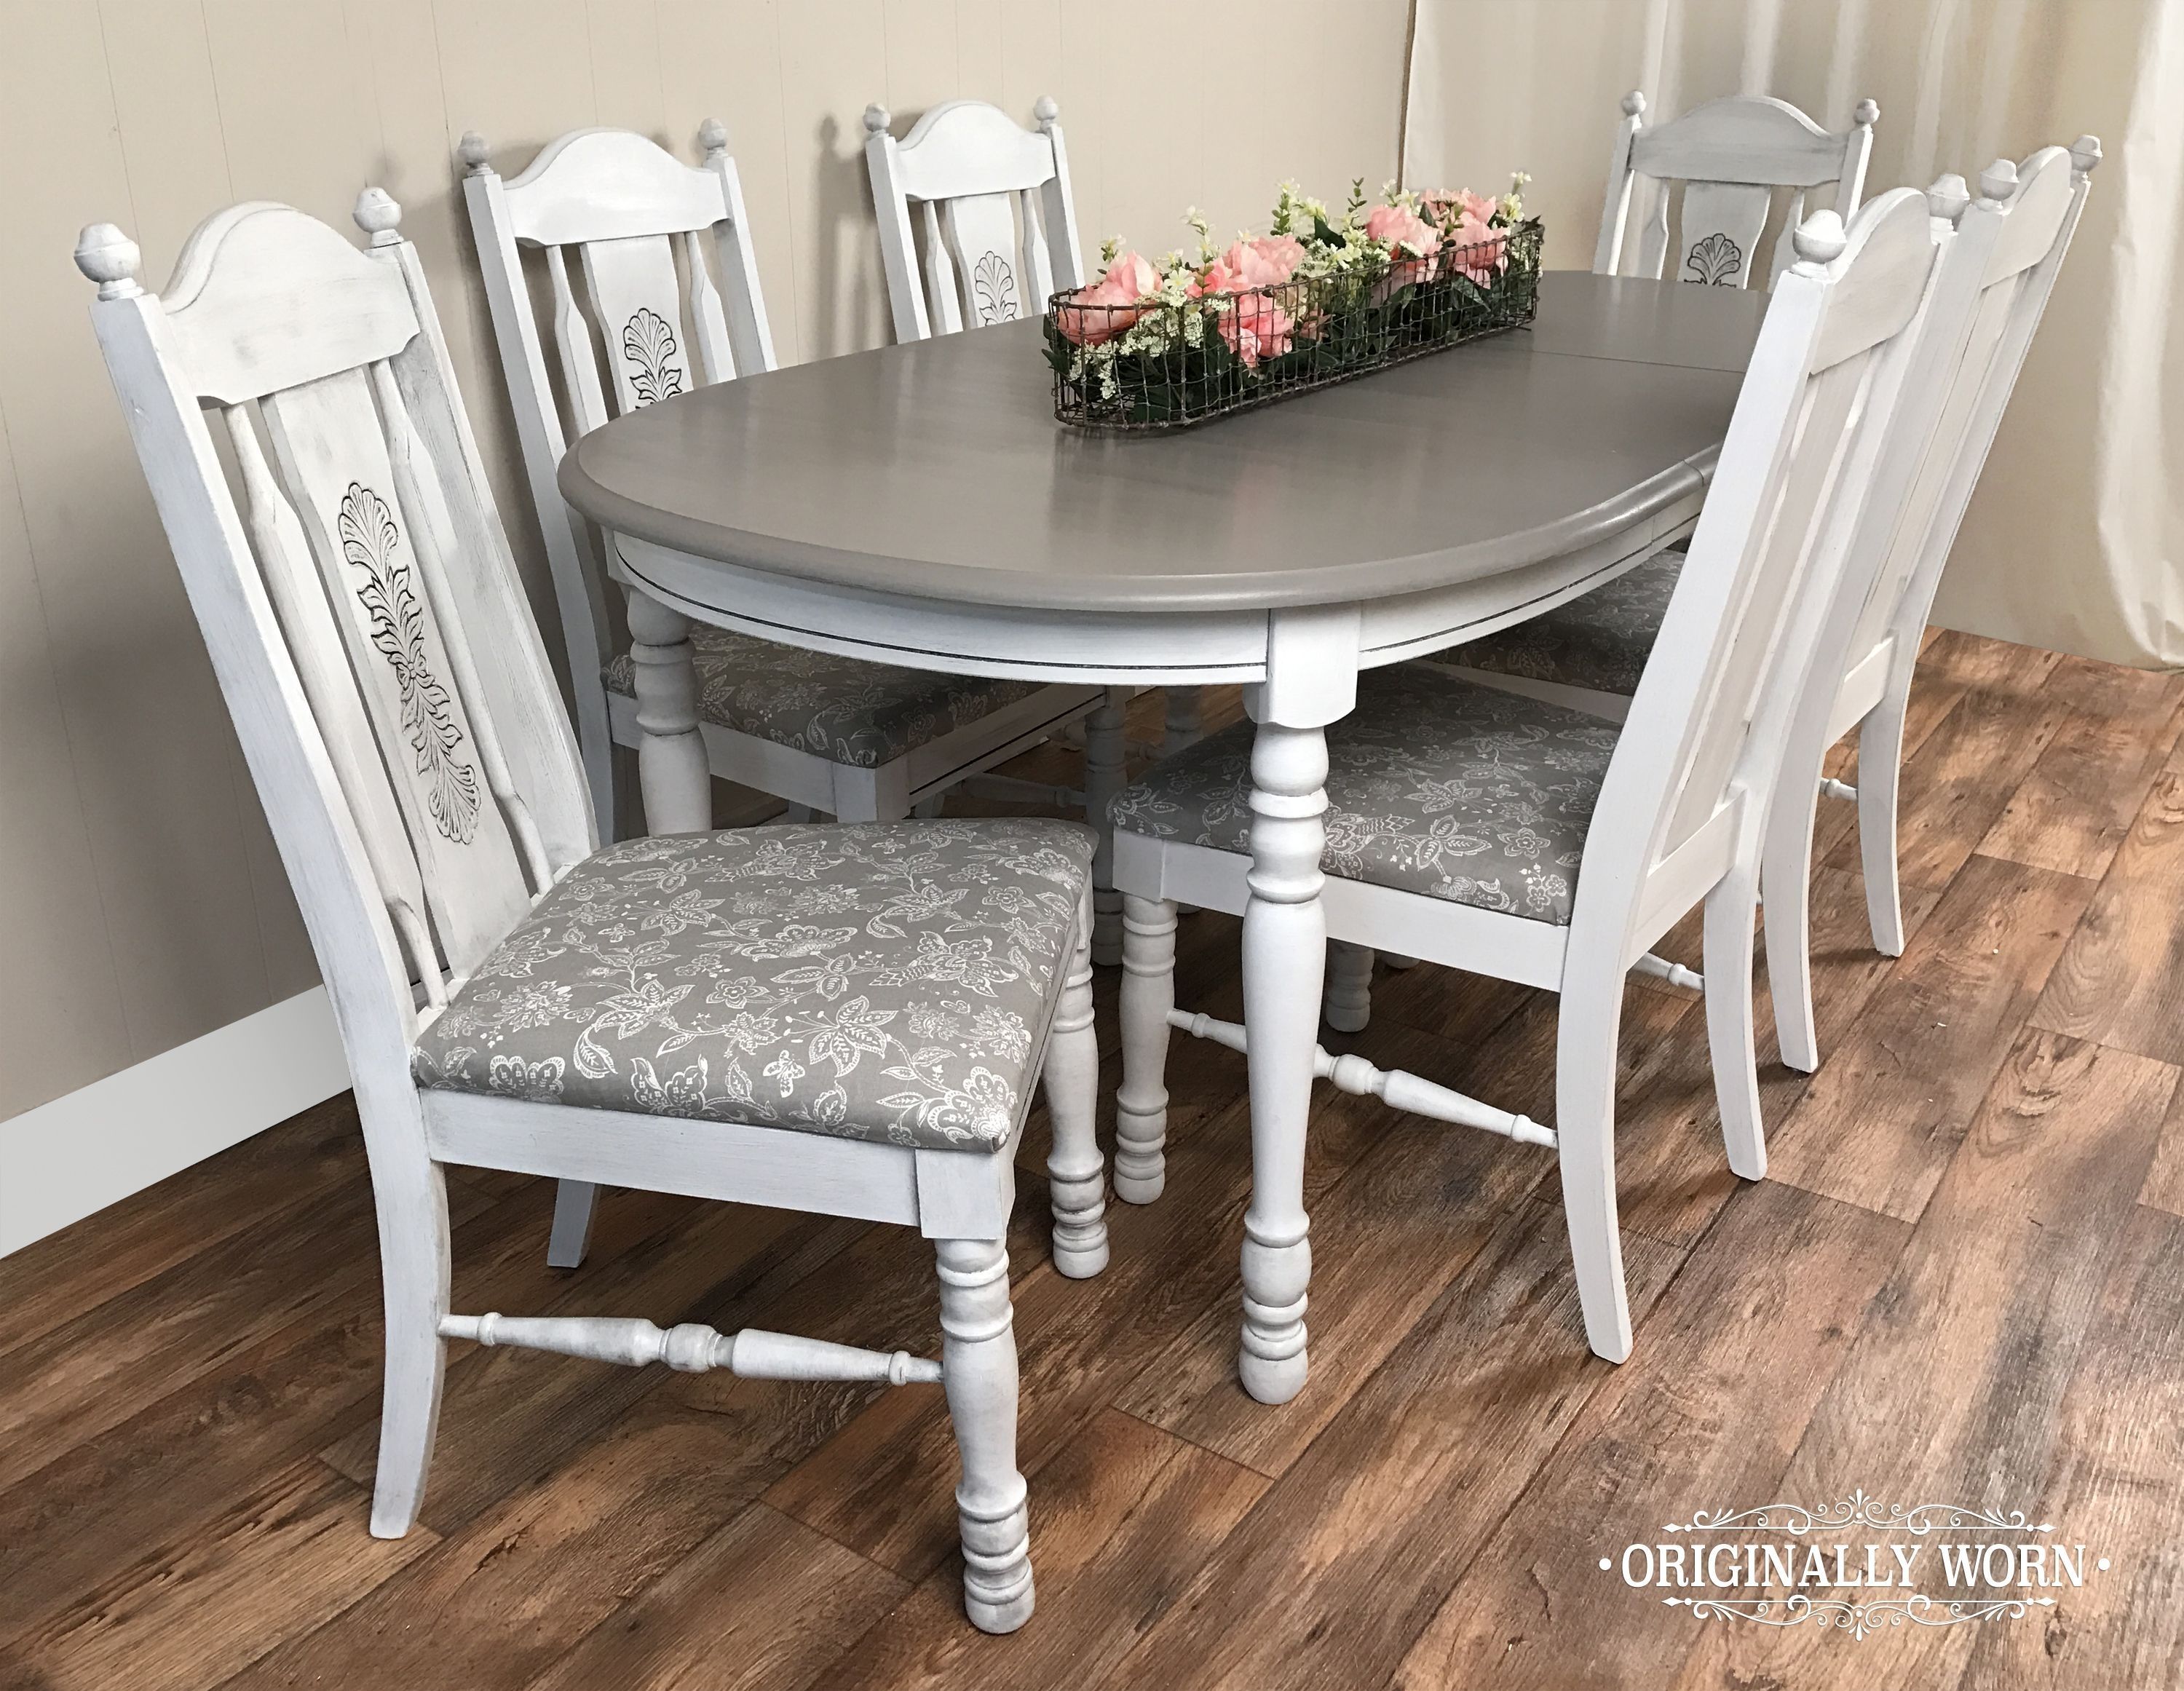 7 Piece Oval Dining Set In Annie Sloan Chalk Paint In Pure White And In Most Recent Market 7 Piece Dining Sets With Host And Side Chairs (View 9 of 20)